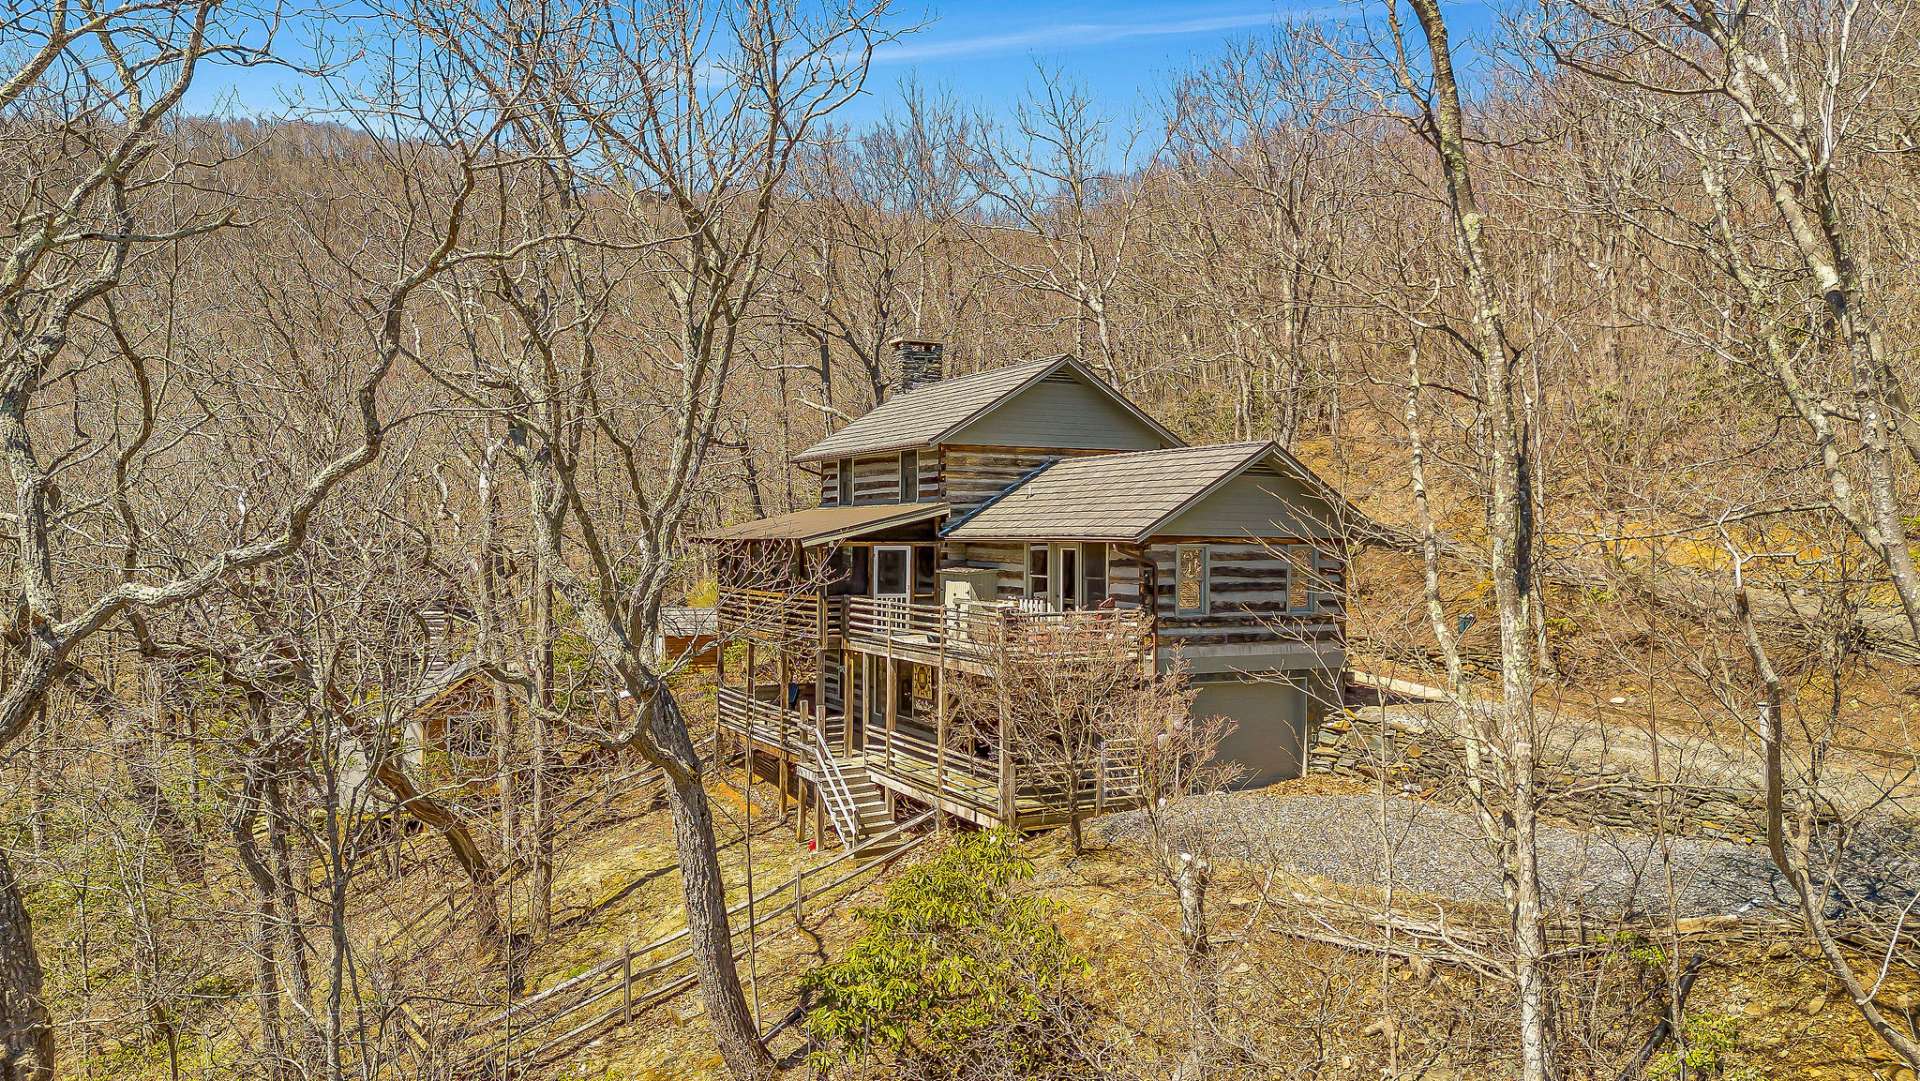 This remarkable property offers the perfect blend of luxury, comfort, and natural beauty.